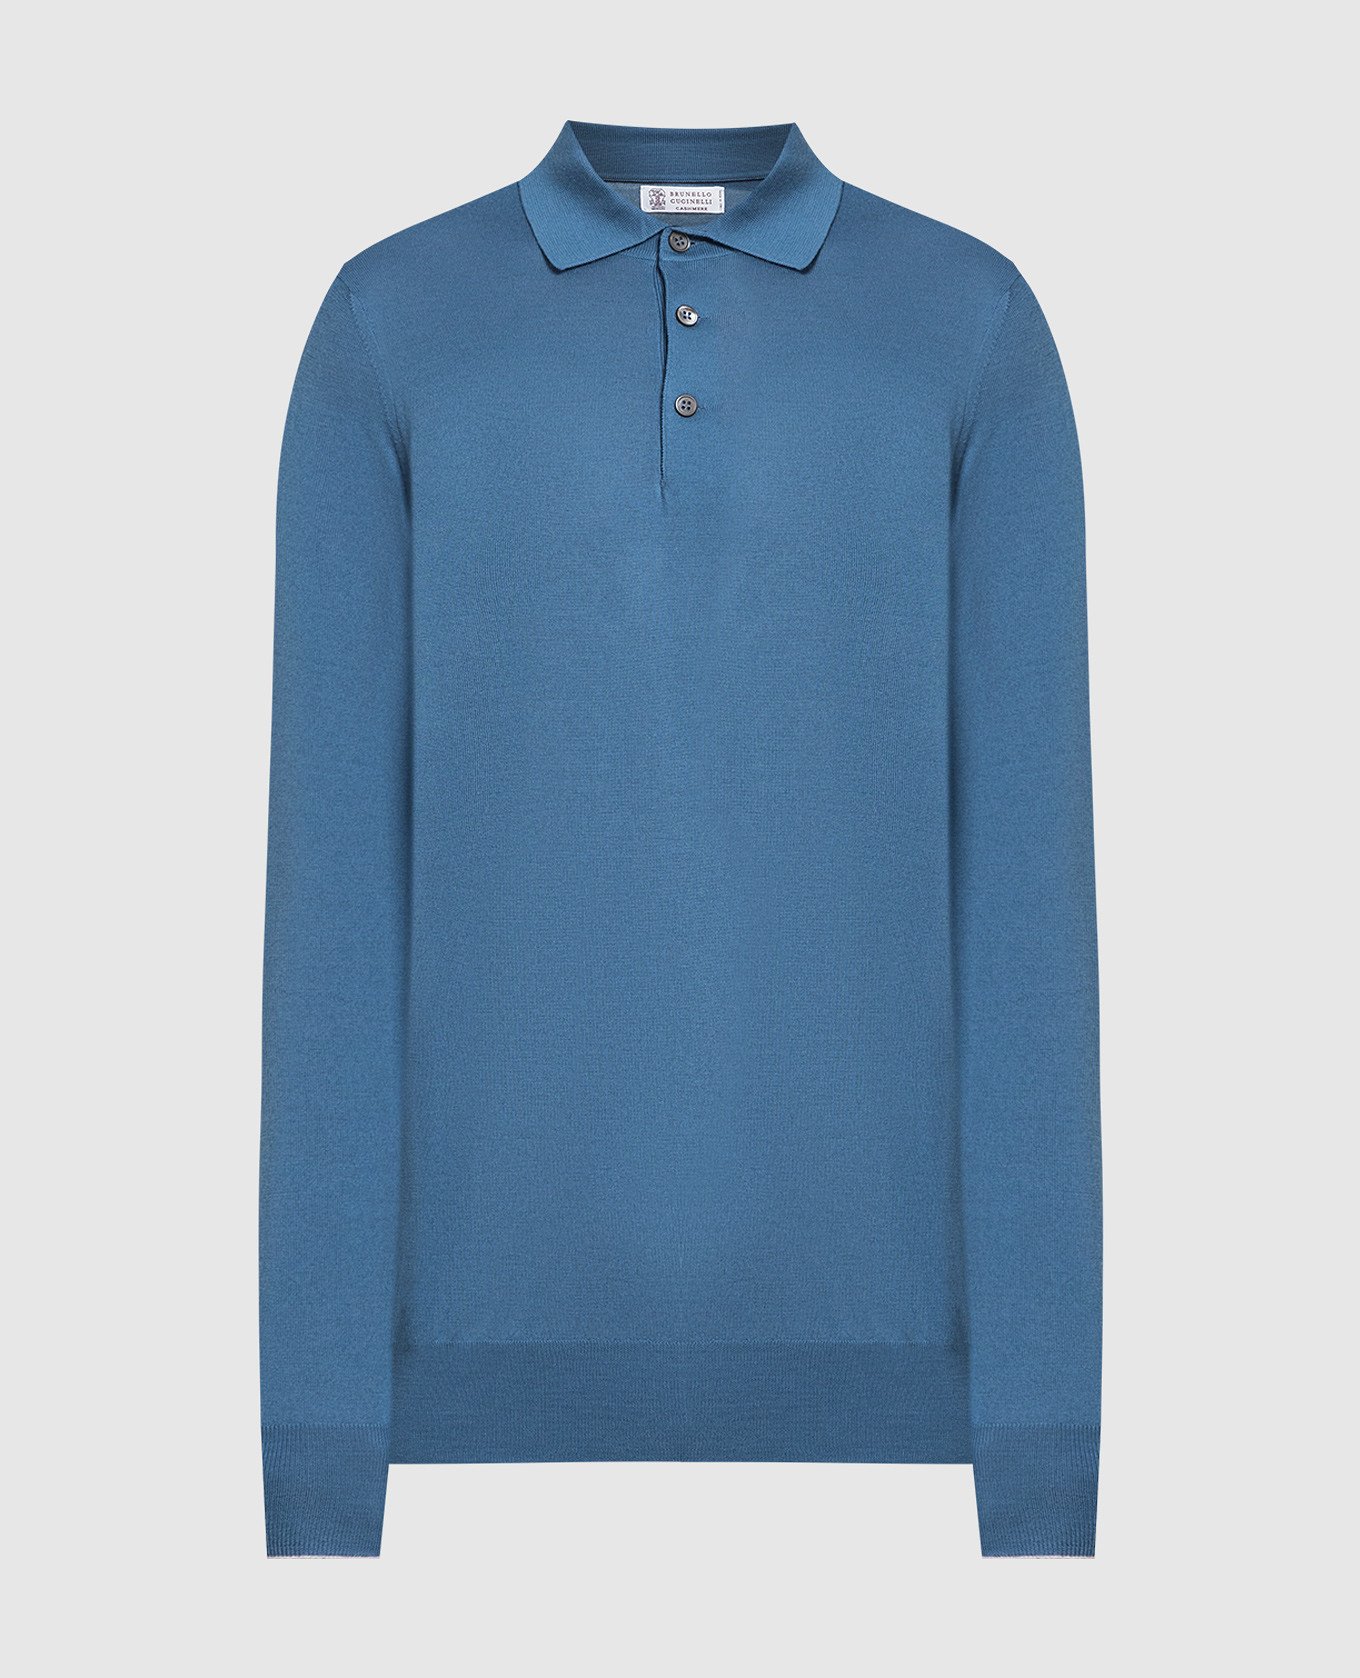 Blue wool and cashmere polo shirt